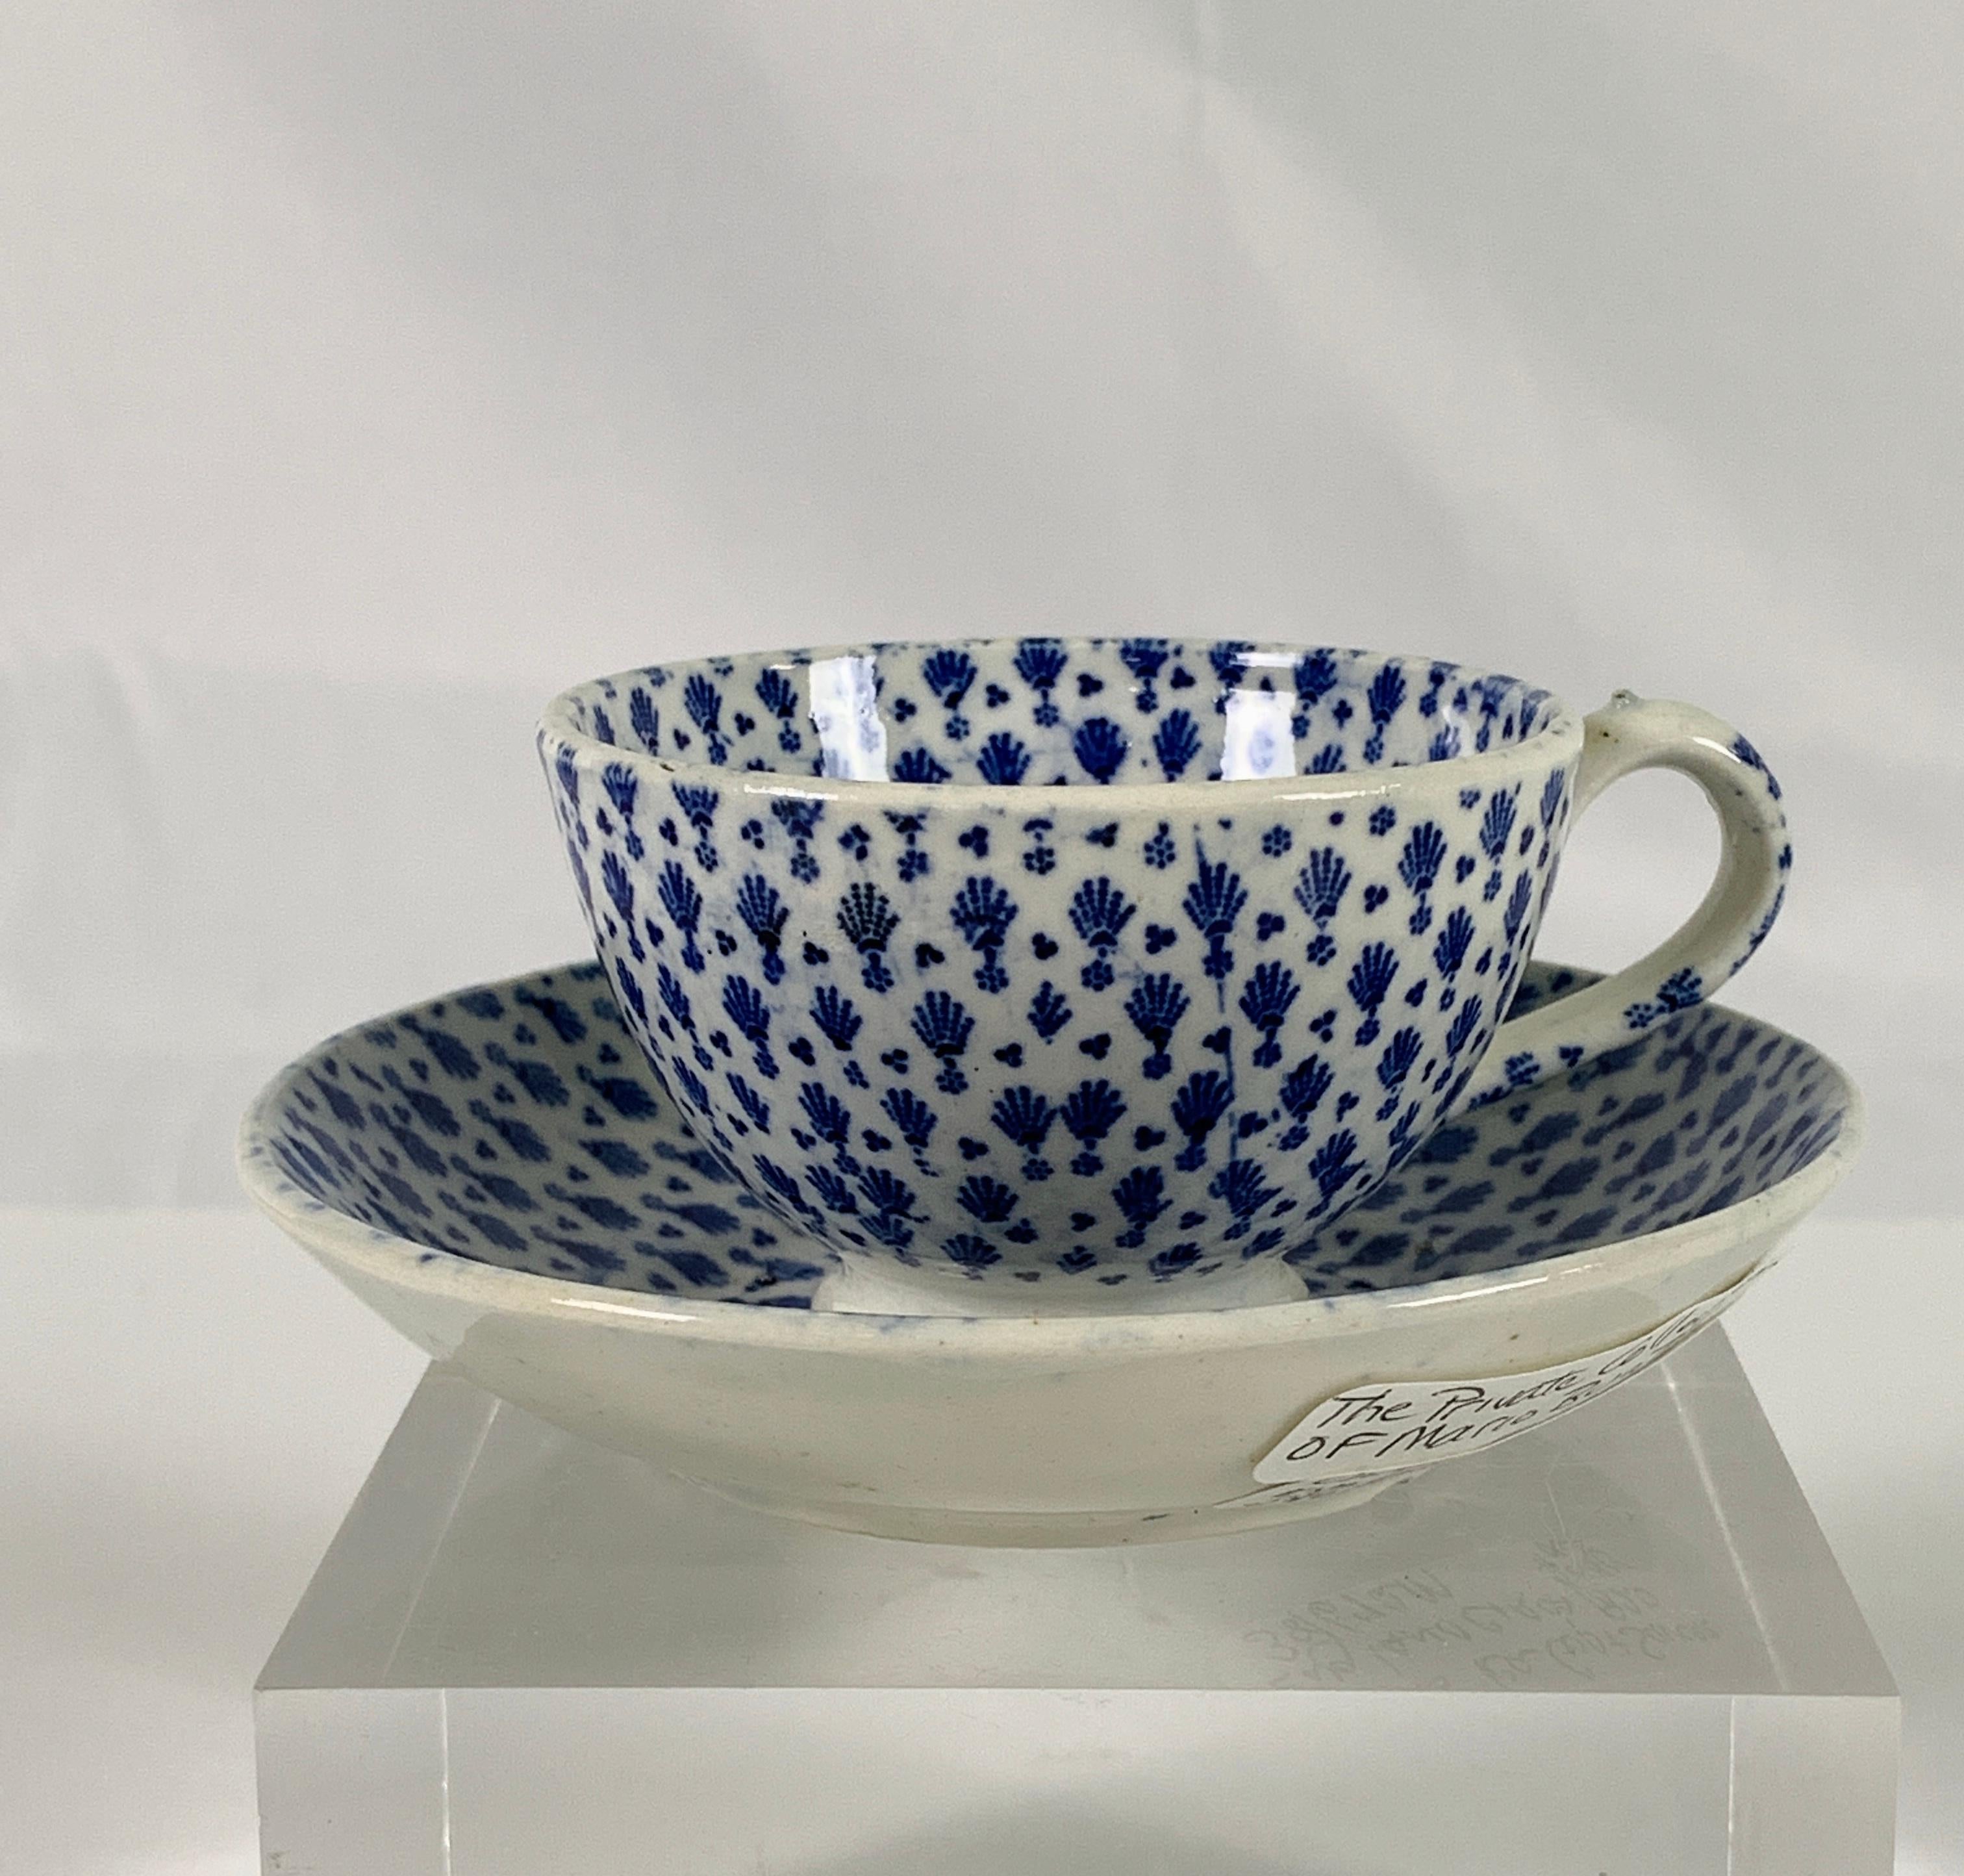 Neoclassical Collection of Mario Buatta a Small Blue and White Tea Cup and Saucer